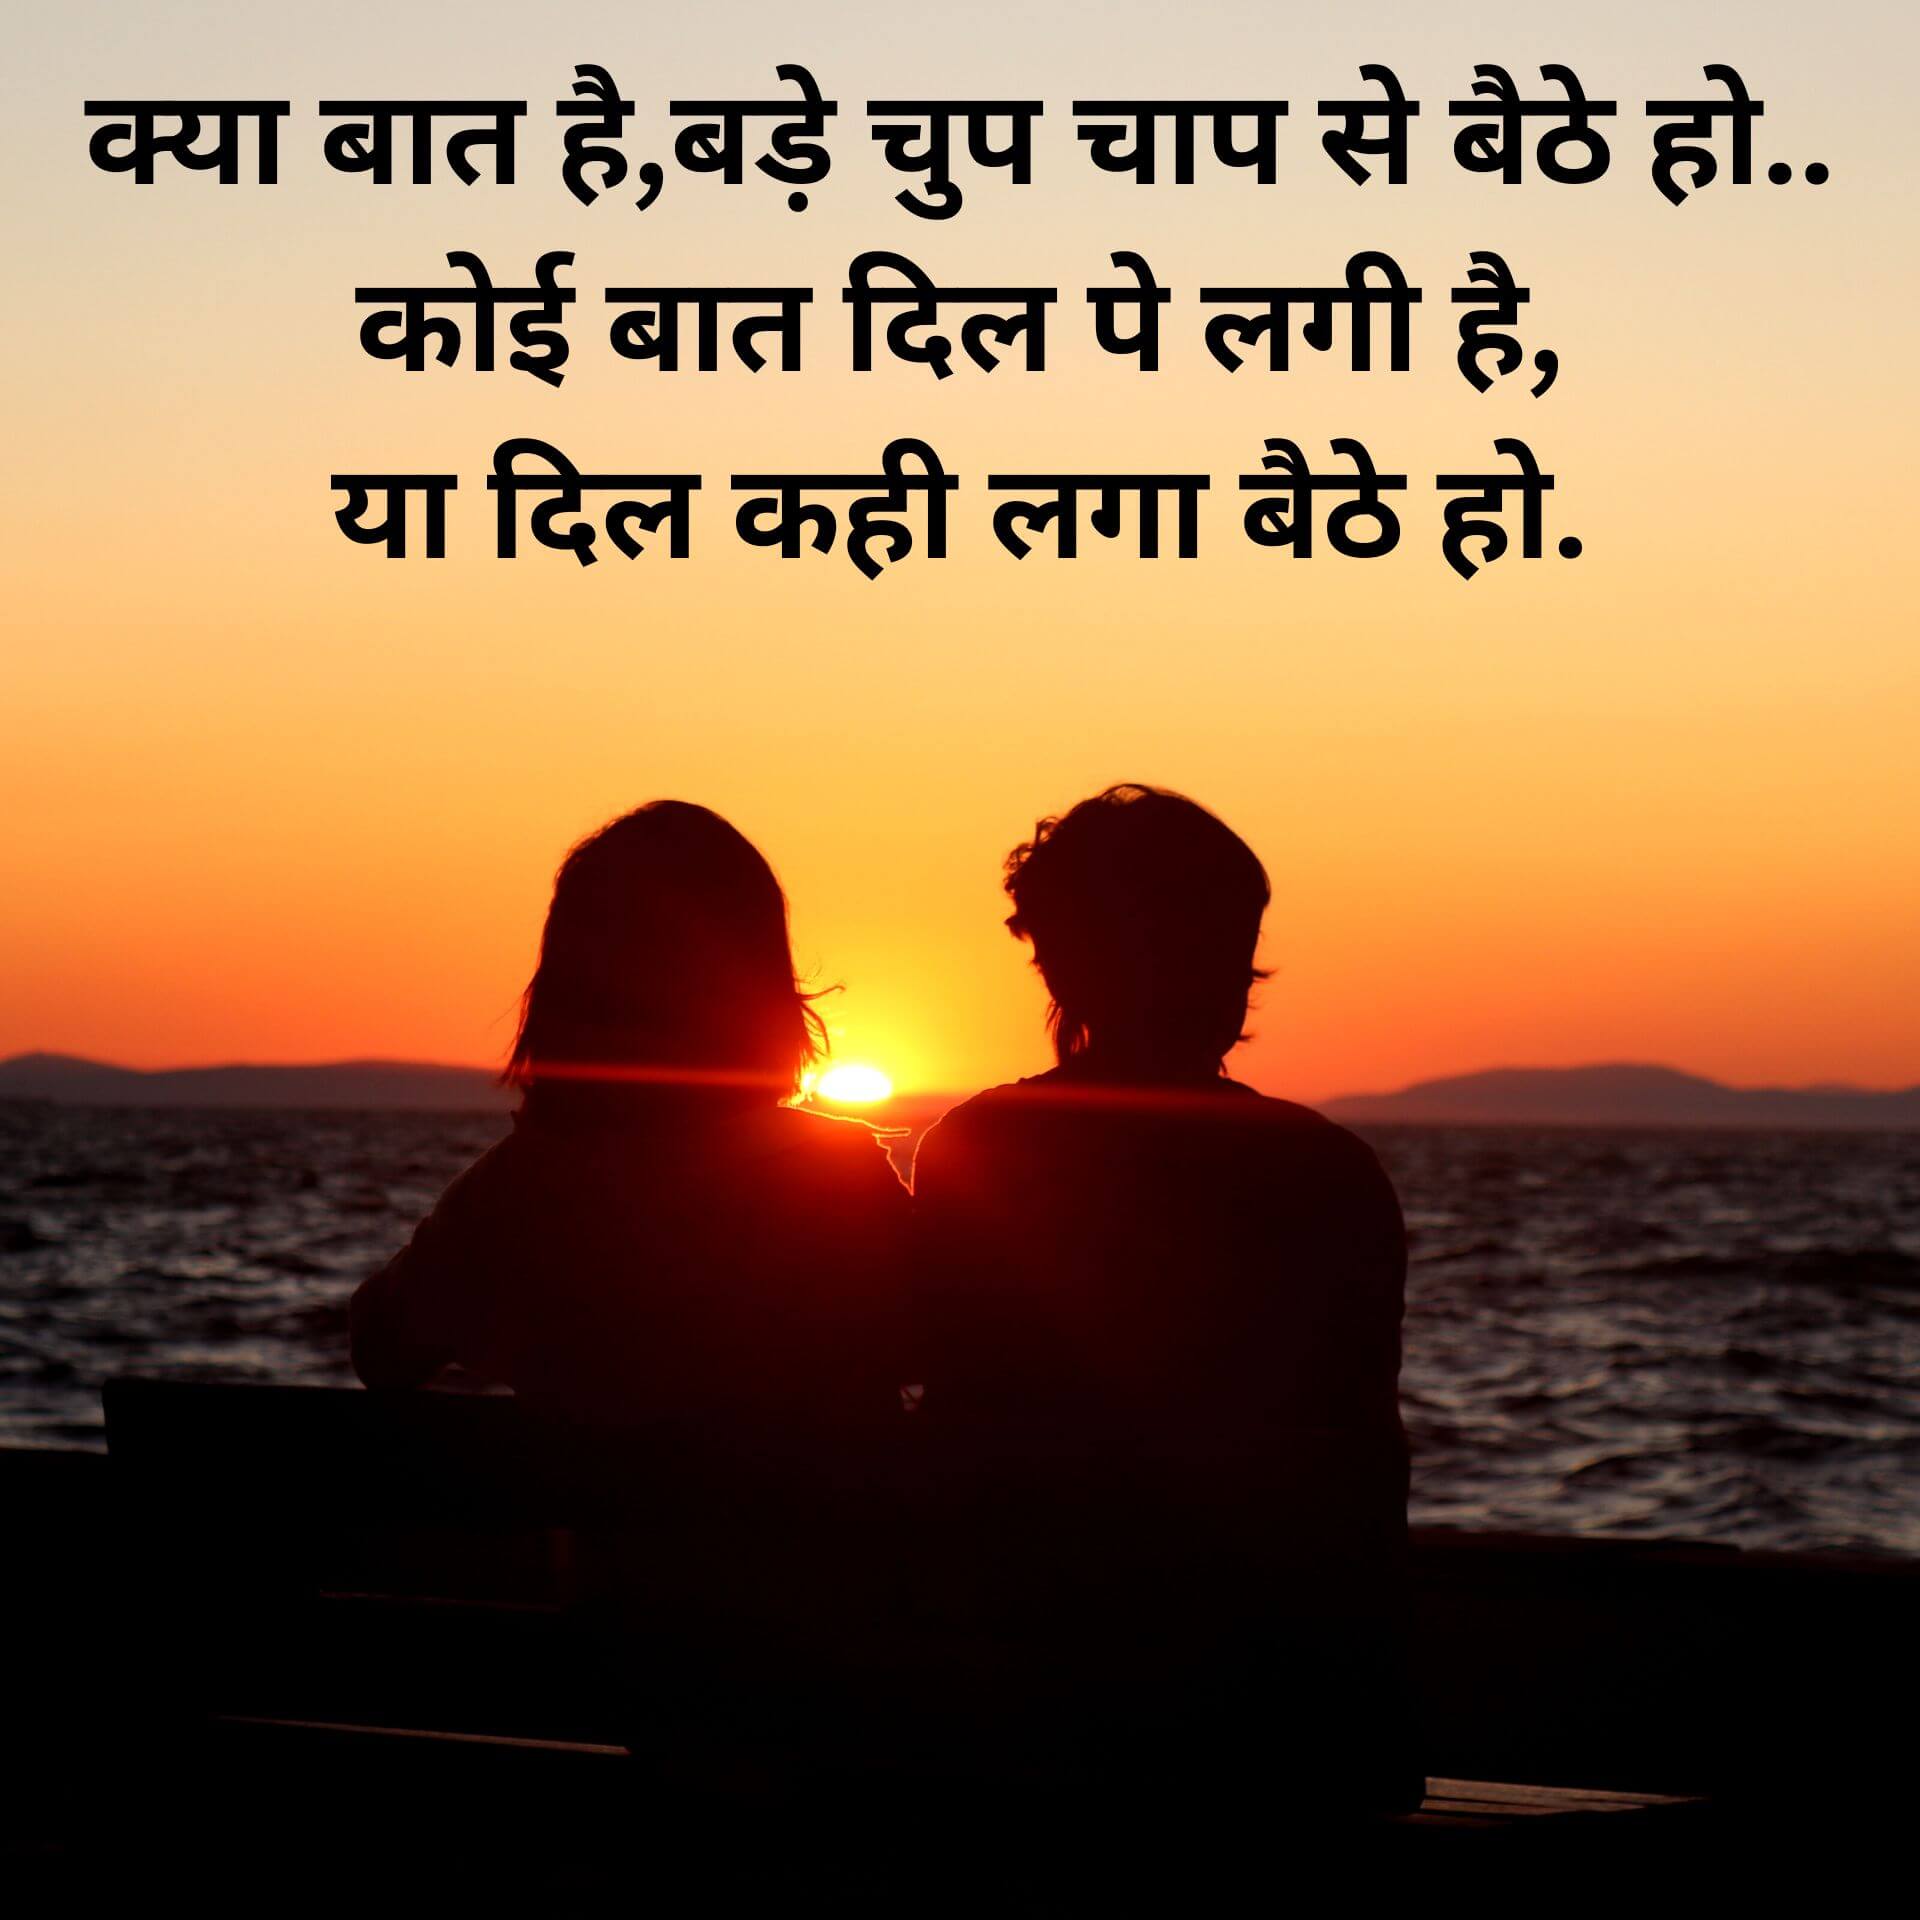 Best Hindi Quotes Wallpaper Free Download 1